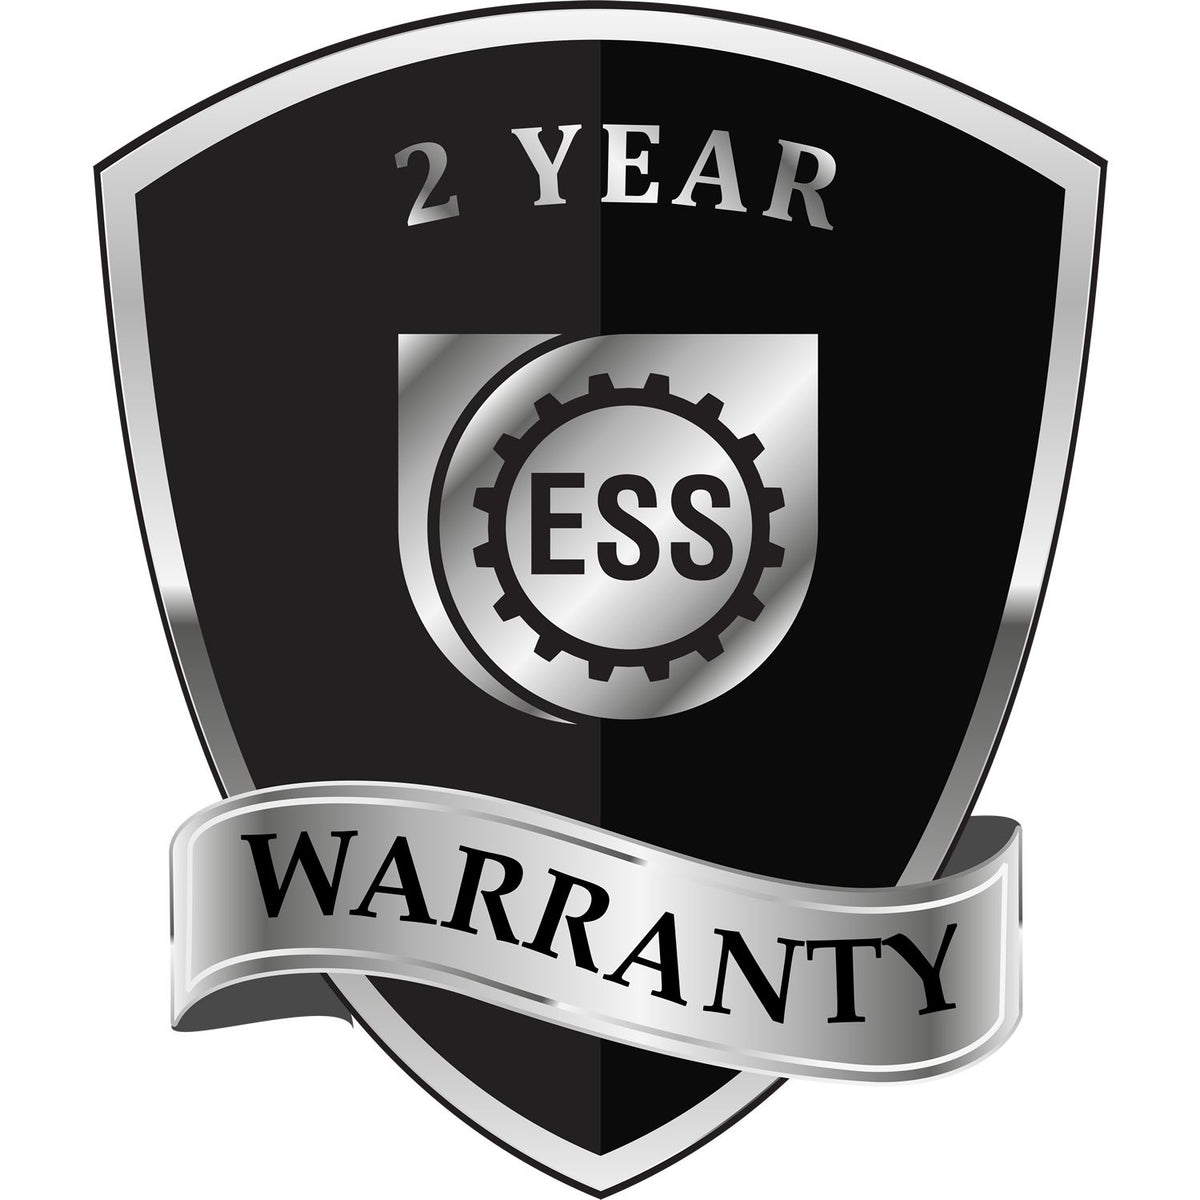 A black and silver badge or emblem showing warranty information for the Gift Oklahoma Engineer Seal